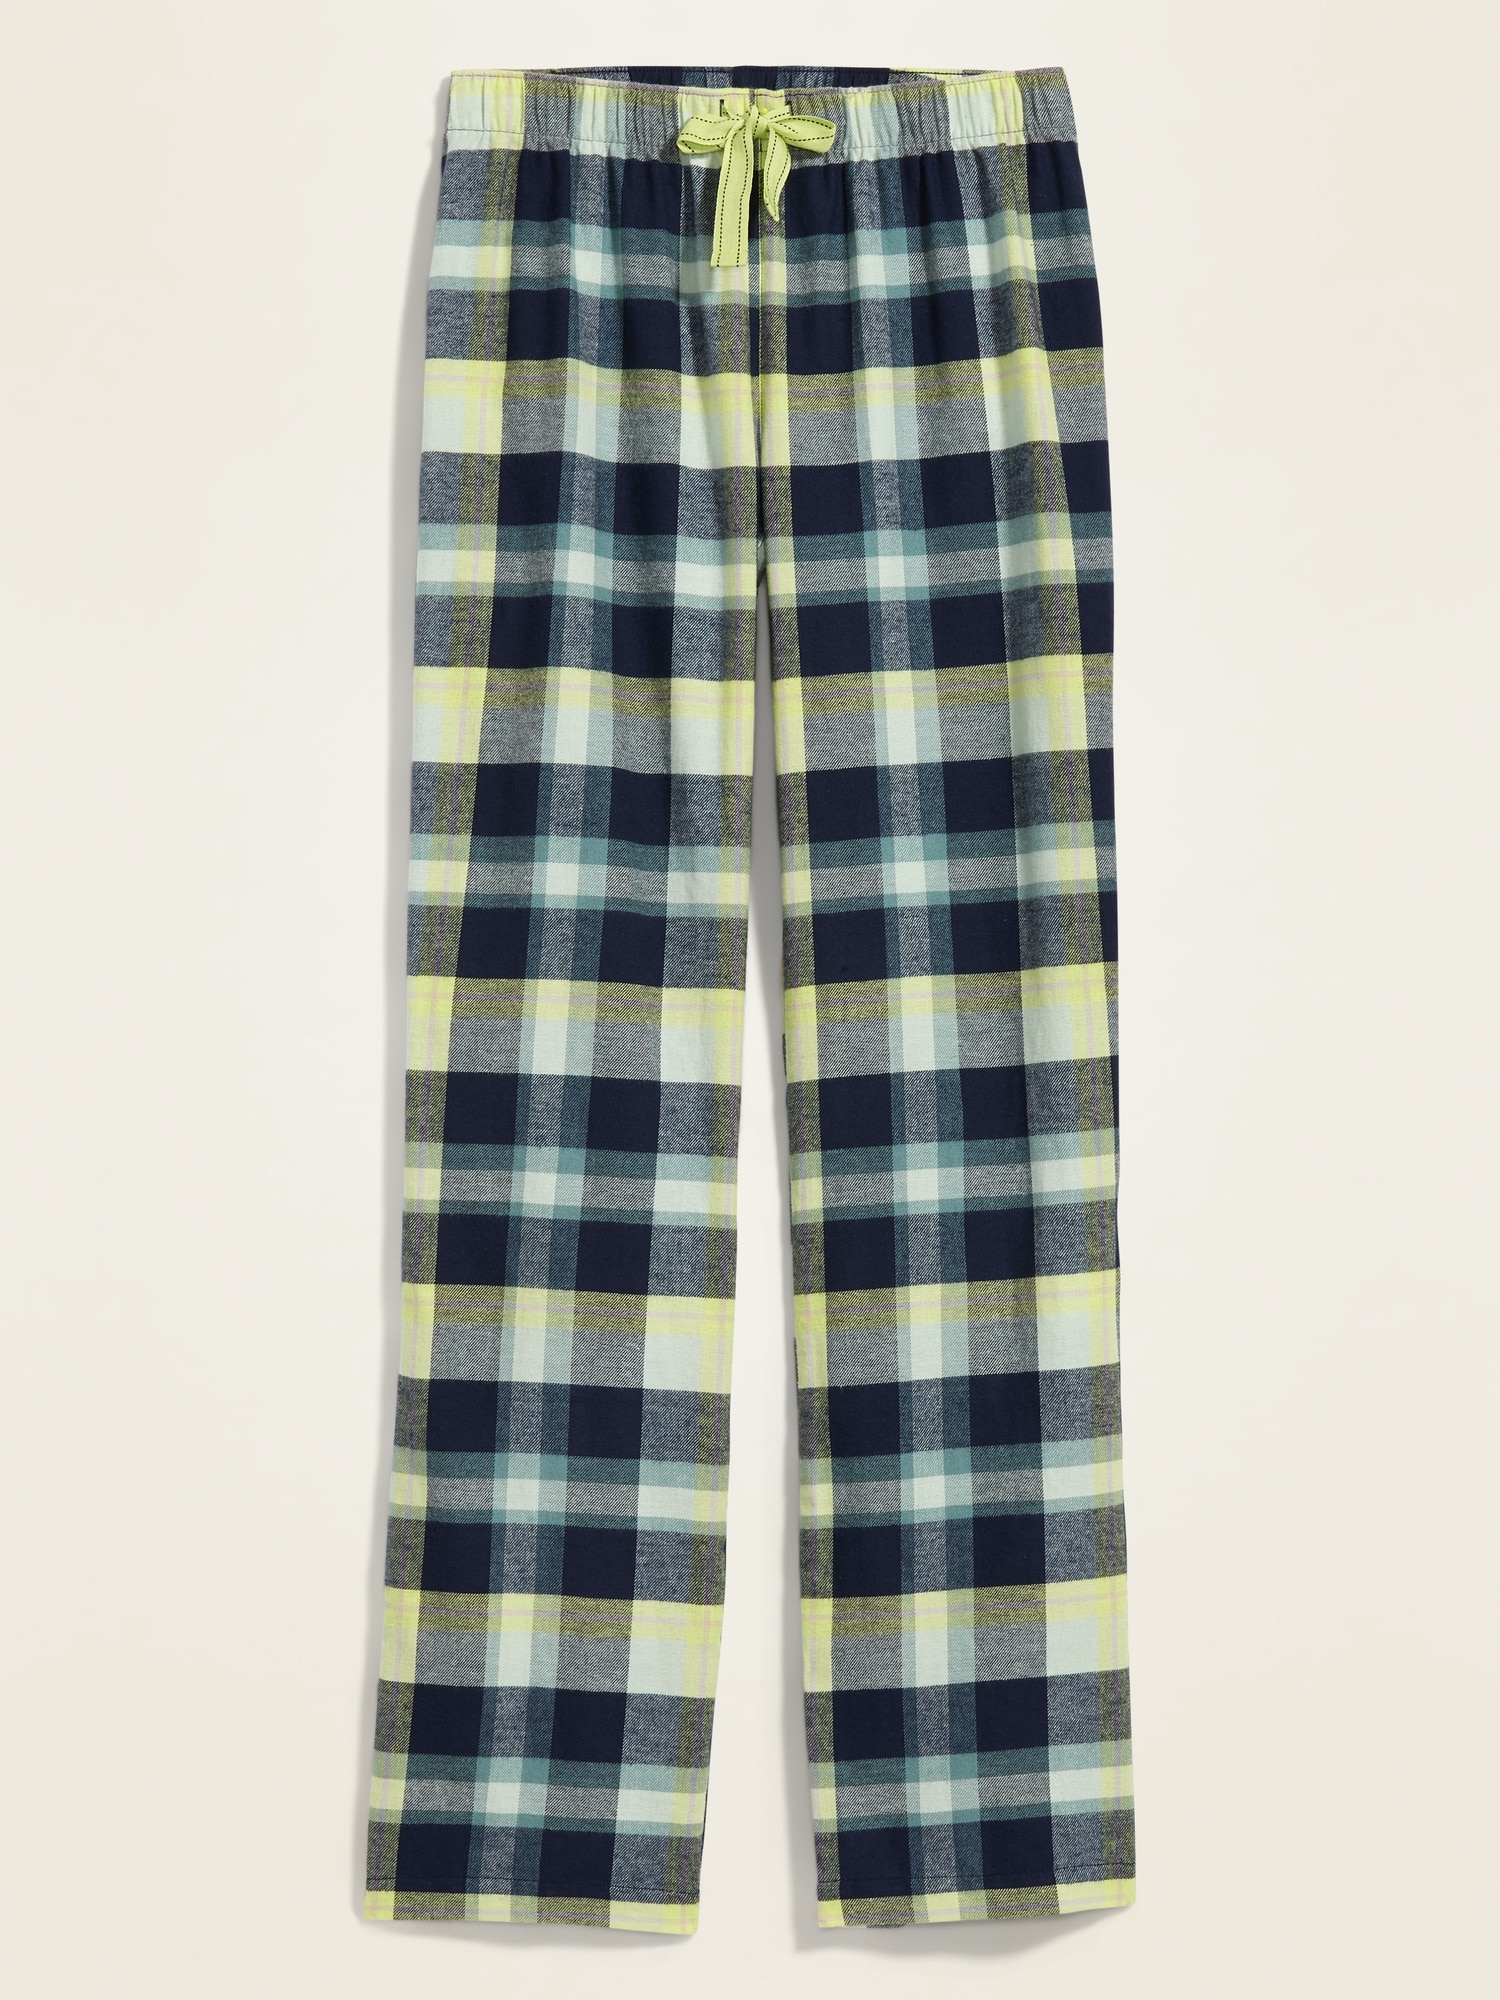 Patterned Flannel Pajama Pants for Women | Old Navy